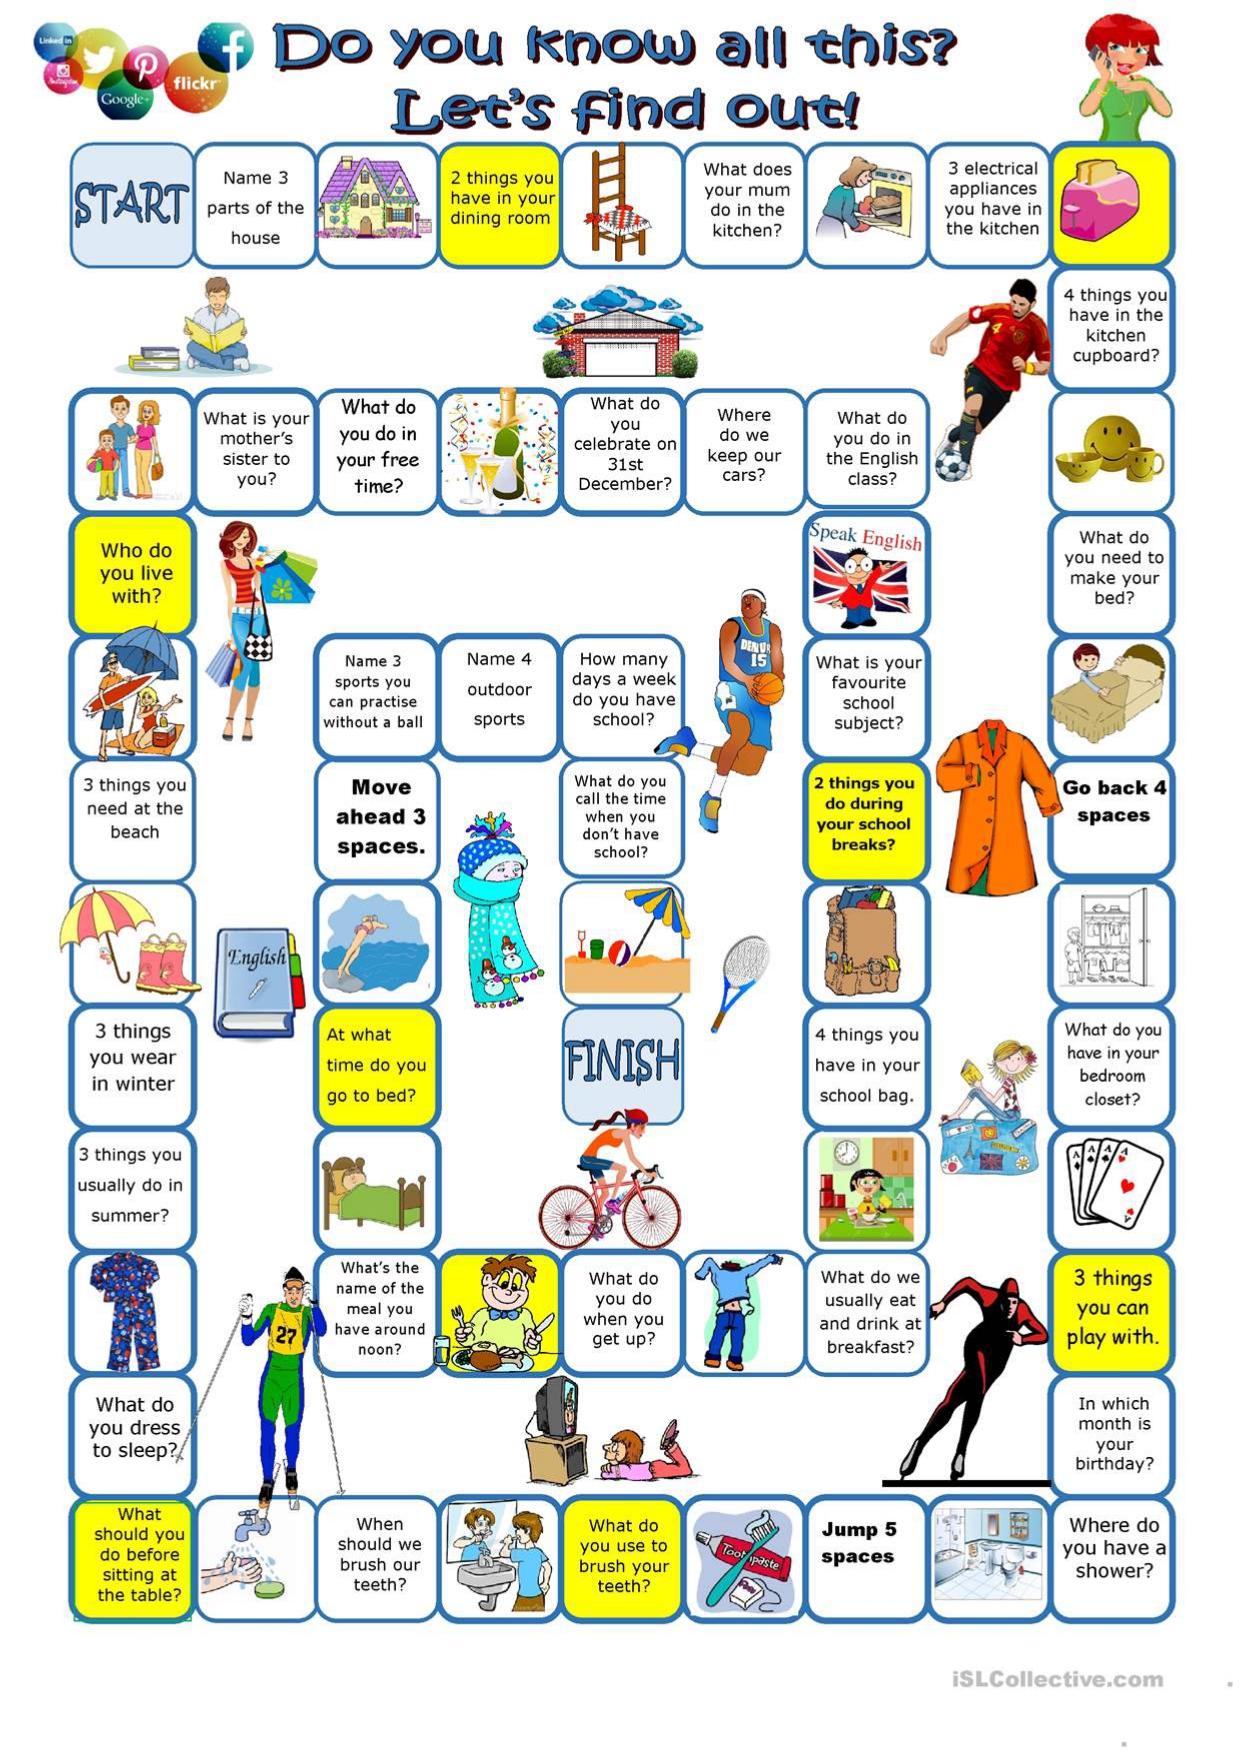 Grammar Corner Do you know all this? ESL Board Game